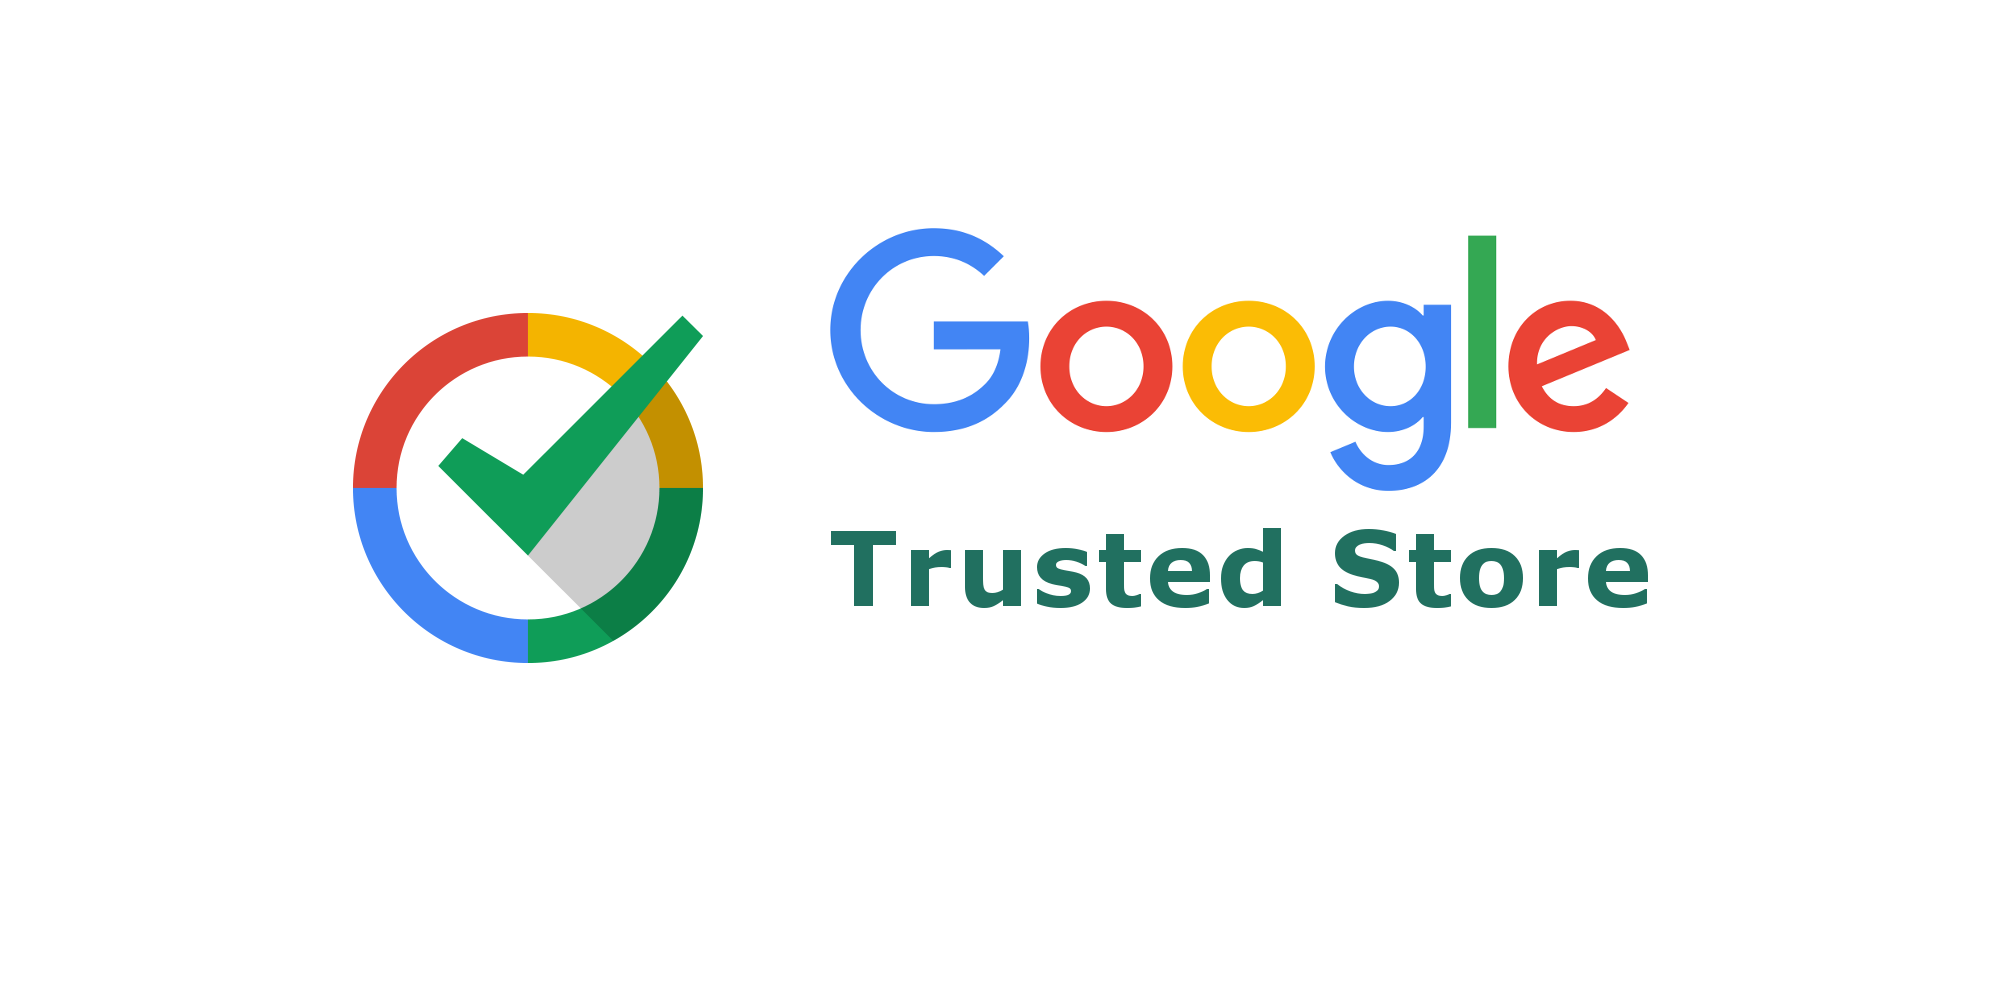 https://storage.tally.so/4bdb7c81-5e6e-488e-89b2-a14f488b1b42/google-trusted-store.png